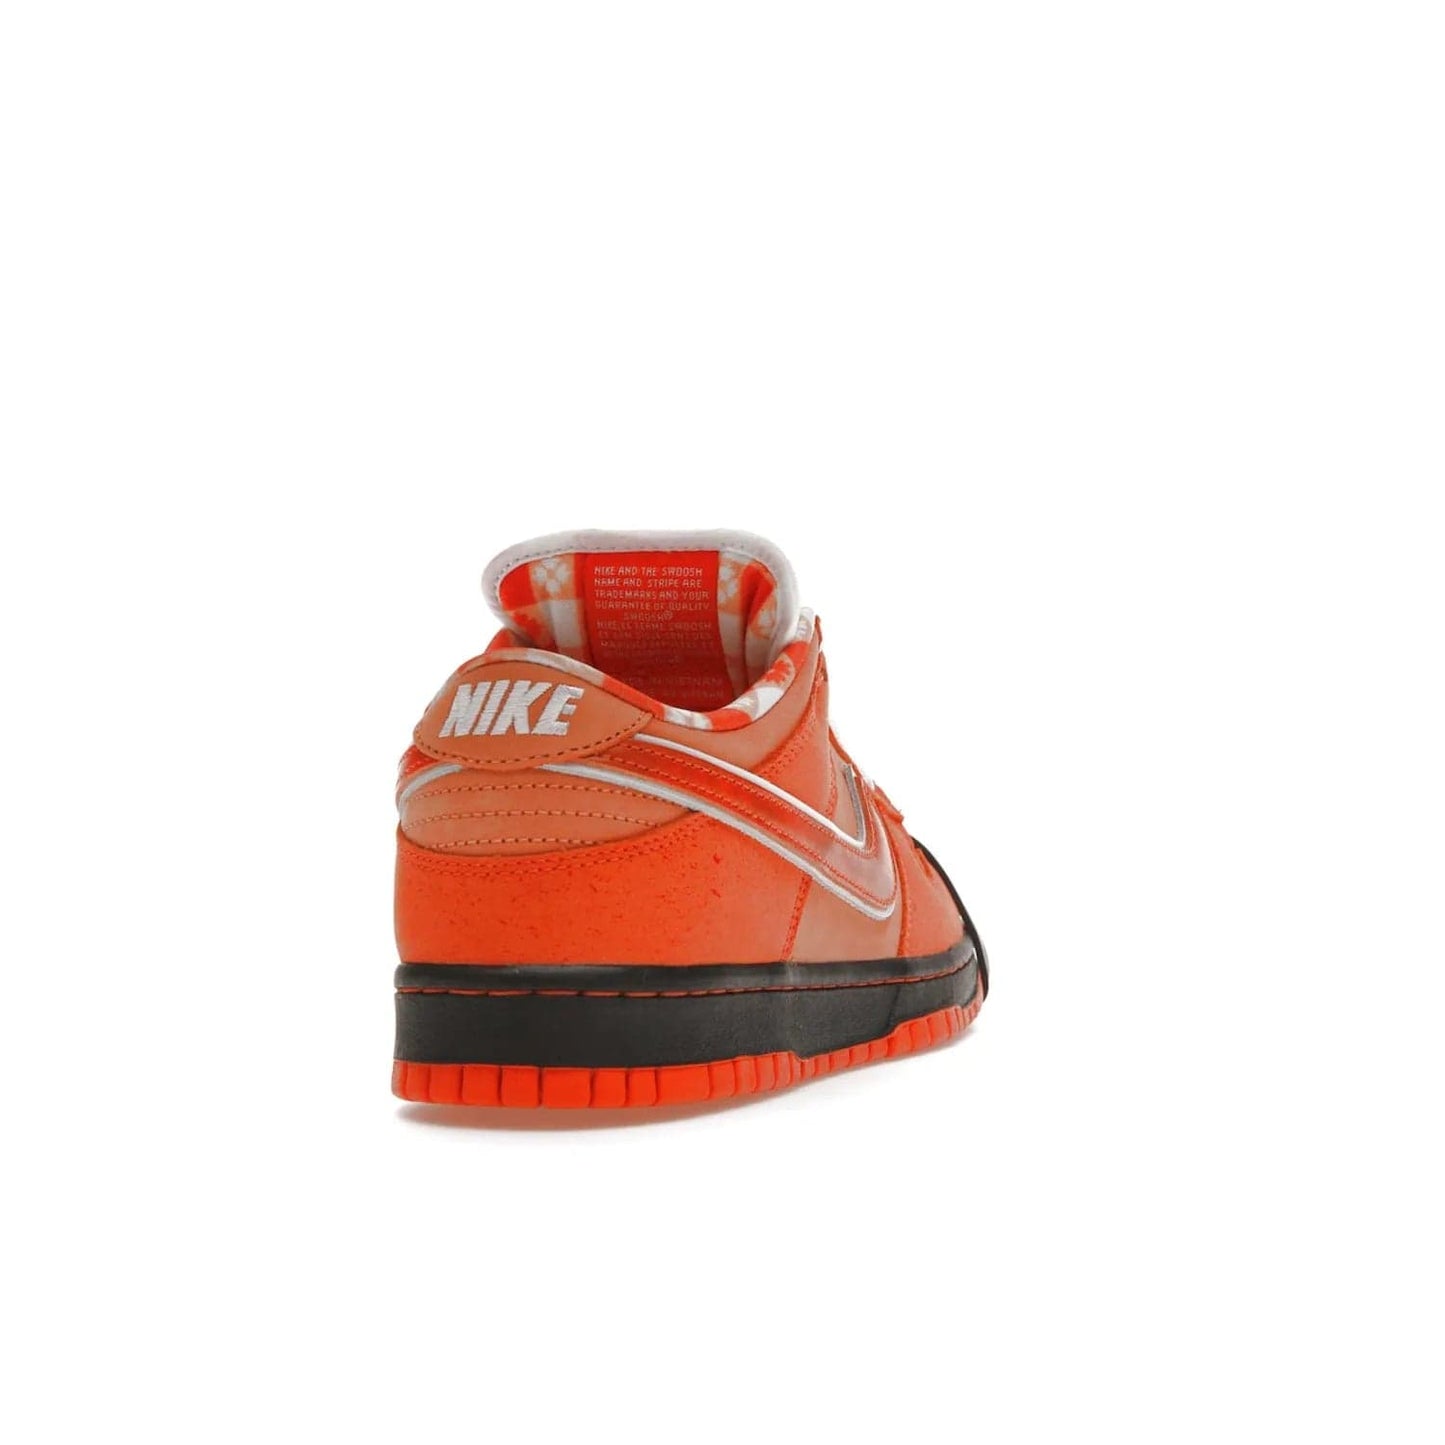 Nike SB Dunk Low Concepts Orange Lobster - Image 30 - Only at www.BallersClubKickz.com - Limited Nike SB Dunk Low Concepts Orange Lobster features premium nubuck upper with vibrant oranges for eye-catching colorblocked design. Signature Nike SB tag and bib-inspired interior for added texture. Outsole and cupsole provide extra reinforcement. Get it 12/20/2022.